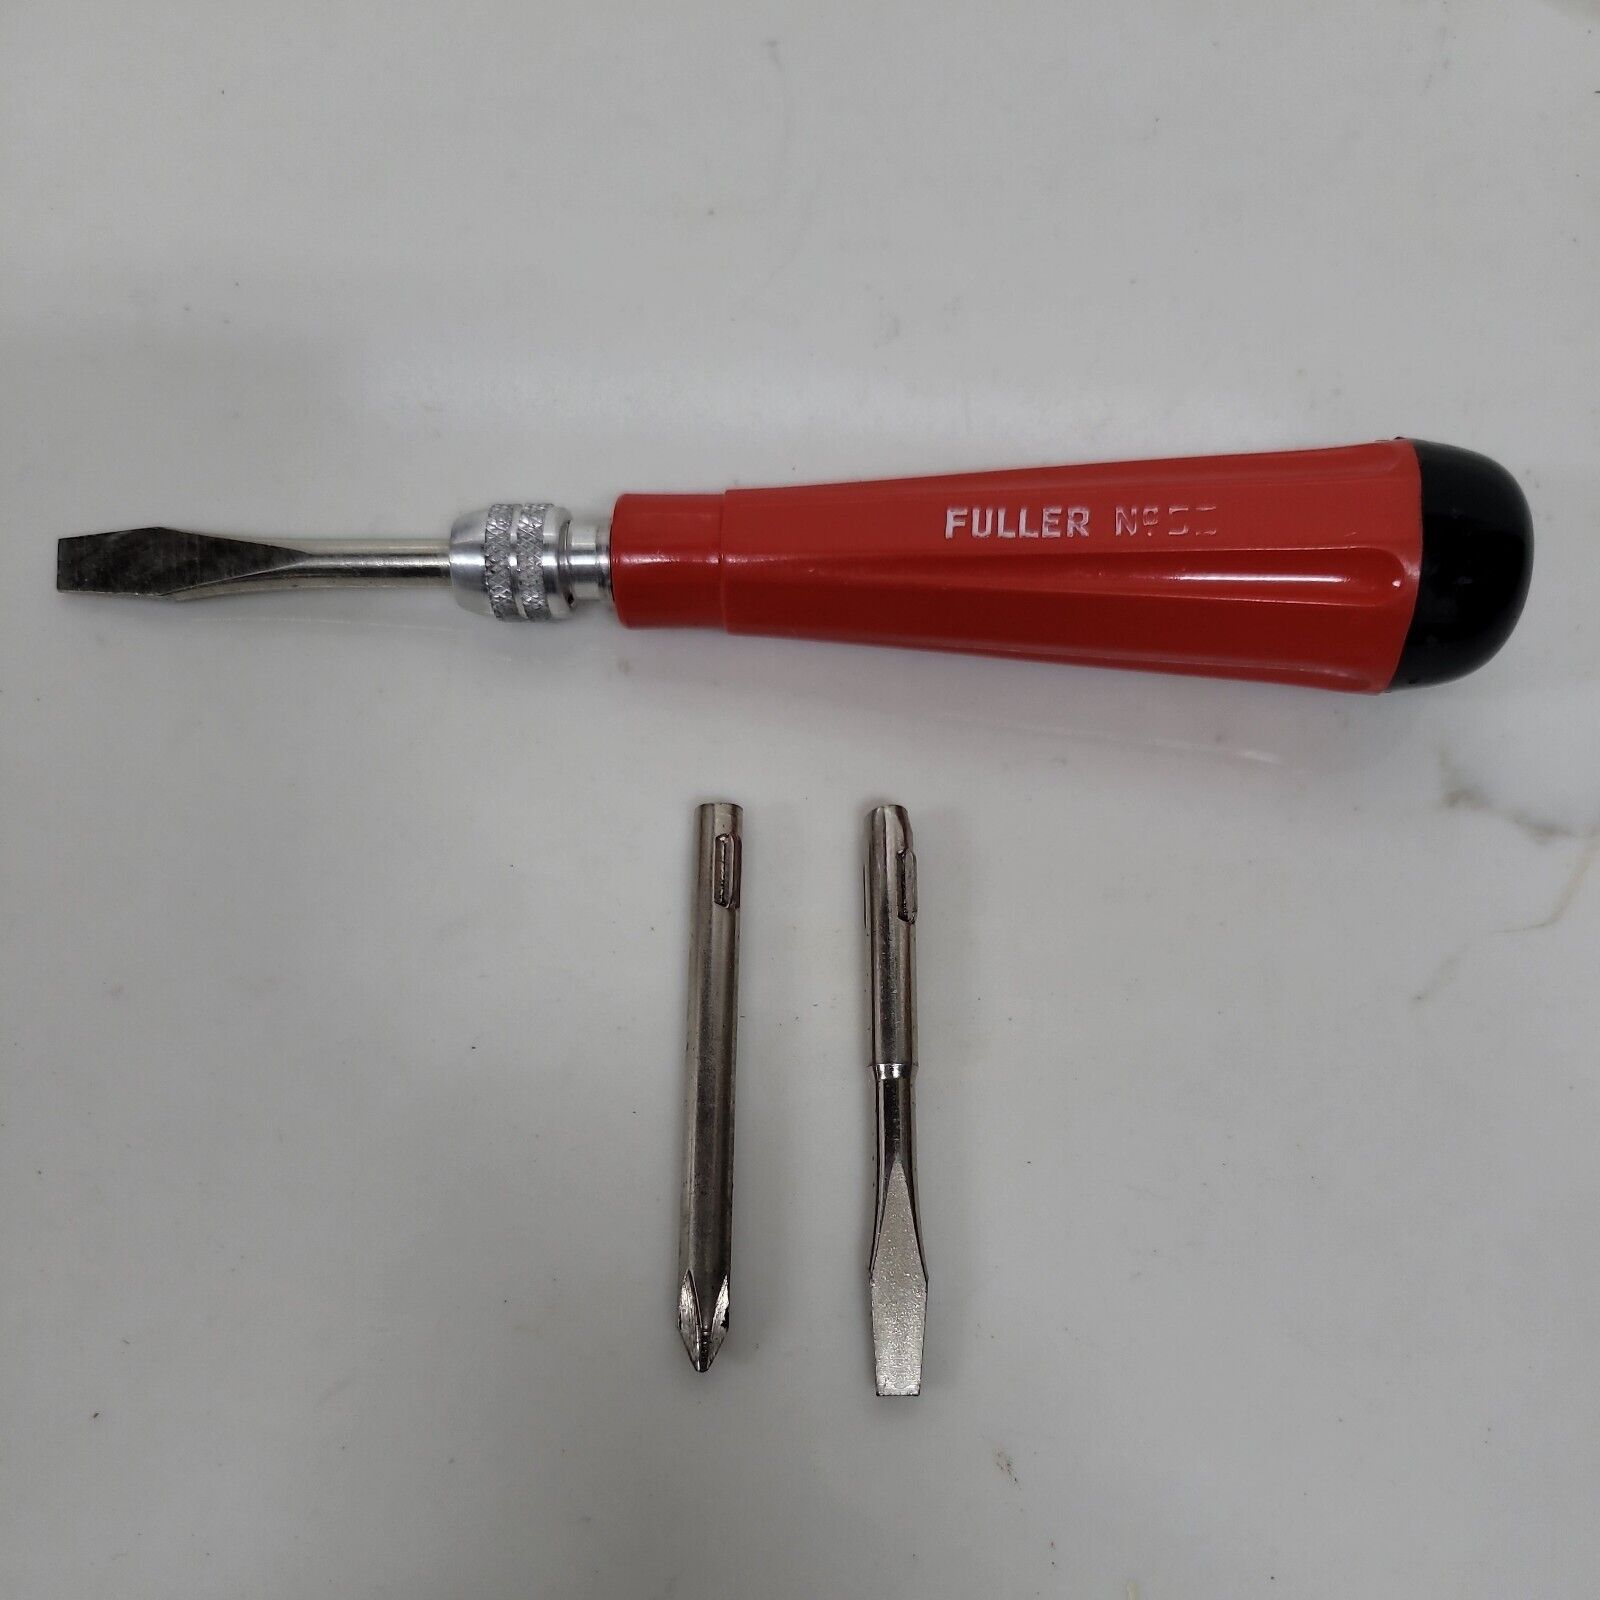 Vintage Fuller No. 55 Screwdriver With Interchangable Tips Red Black 7 in